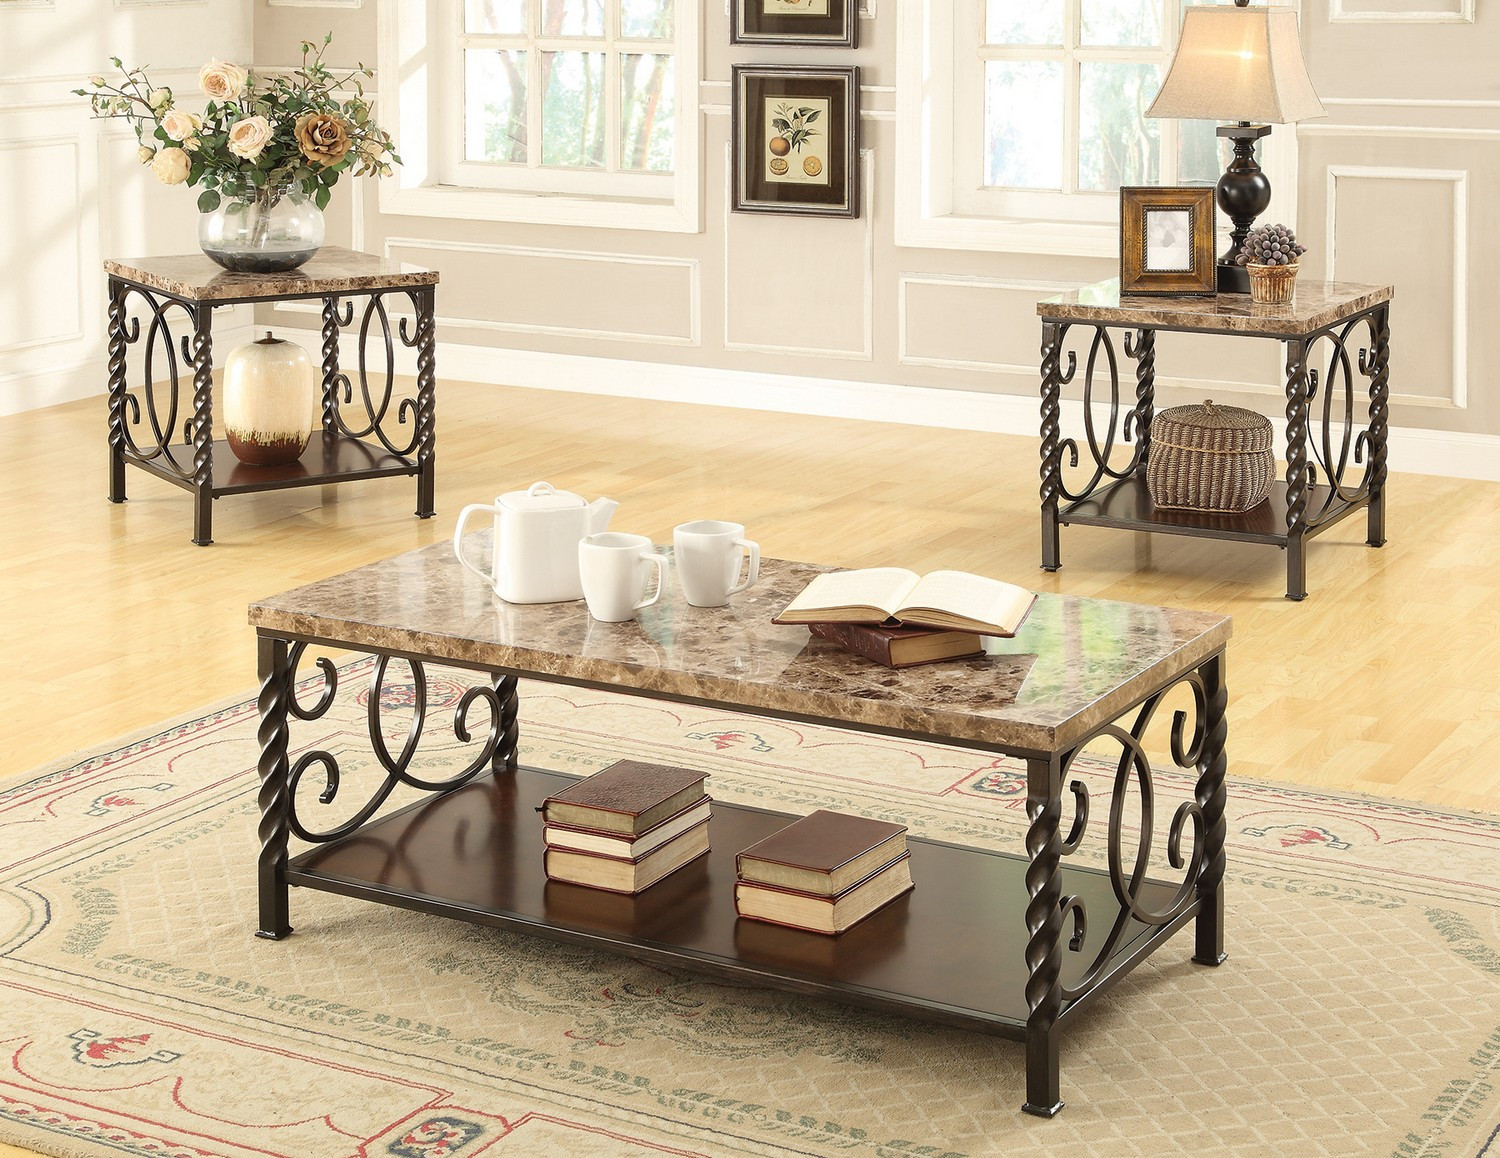 Living Room Coffee Table Sets
 Coaster 3 Pc Coffee Cocktail Table Set Dark Brown